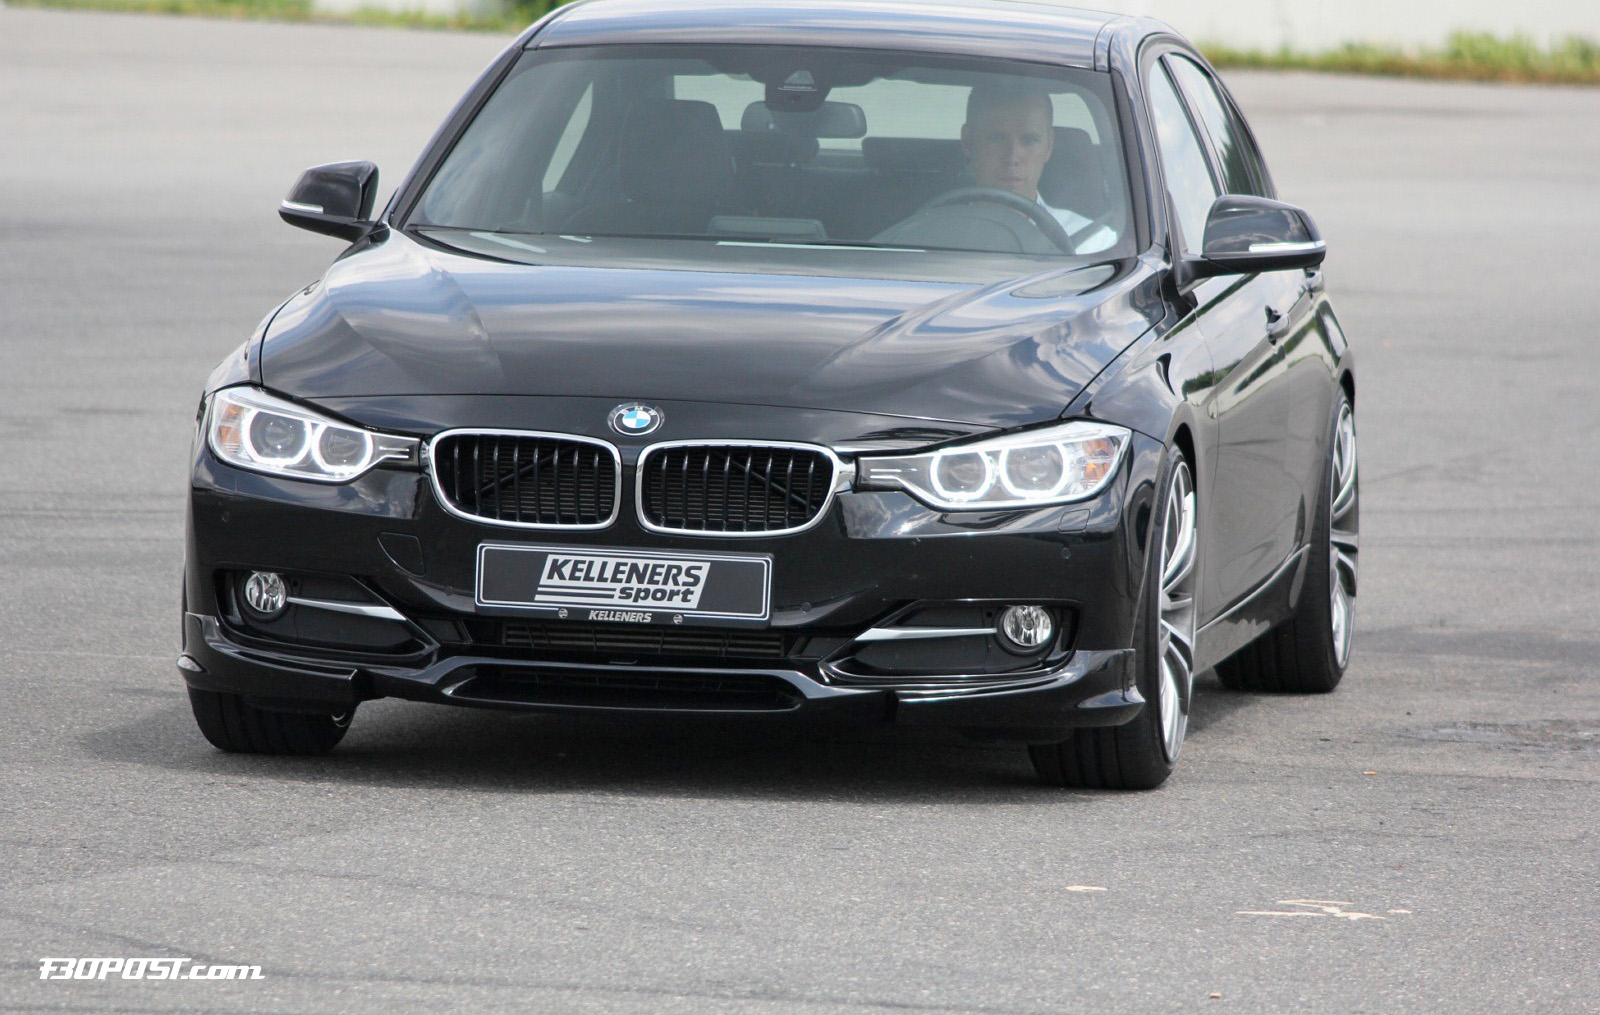 Kelleners-Sport_BMW-F30_without-M-package_14